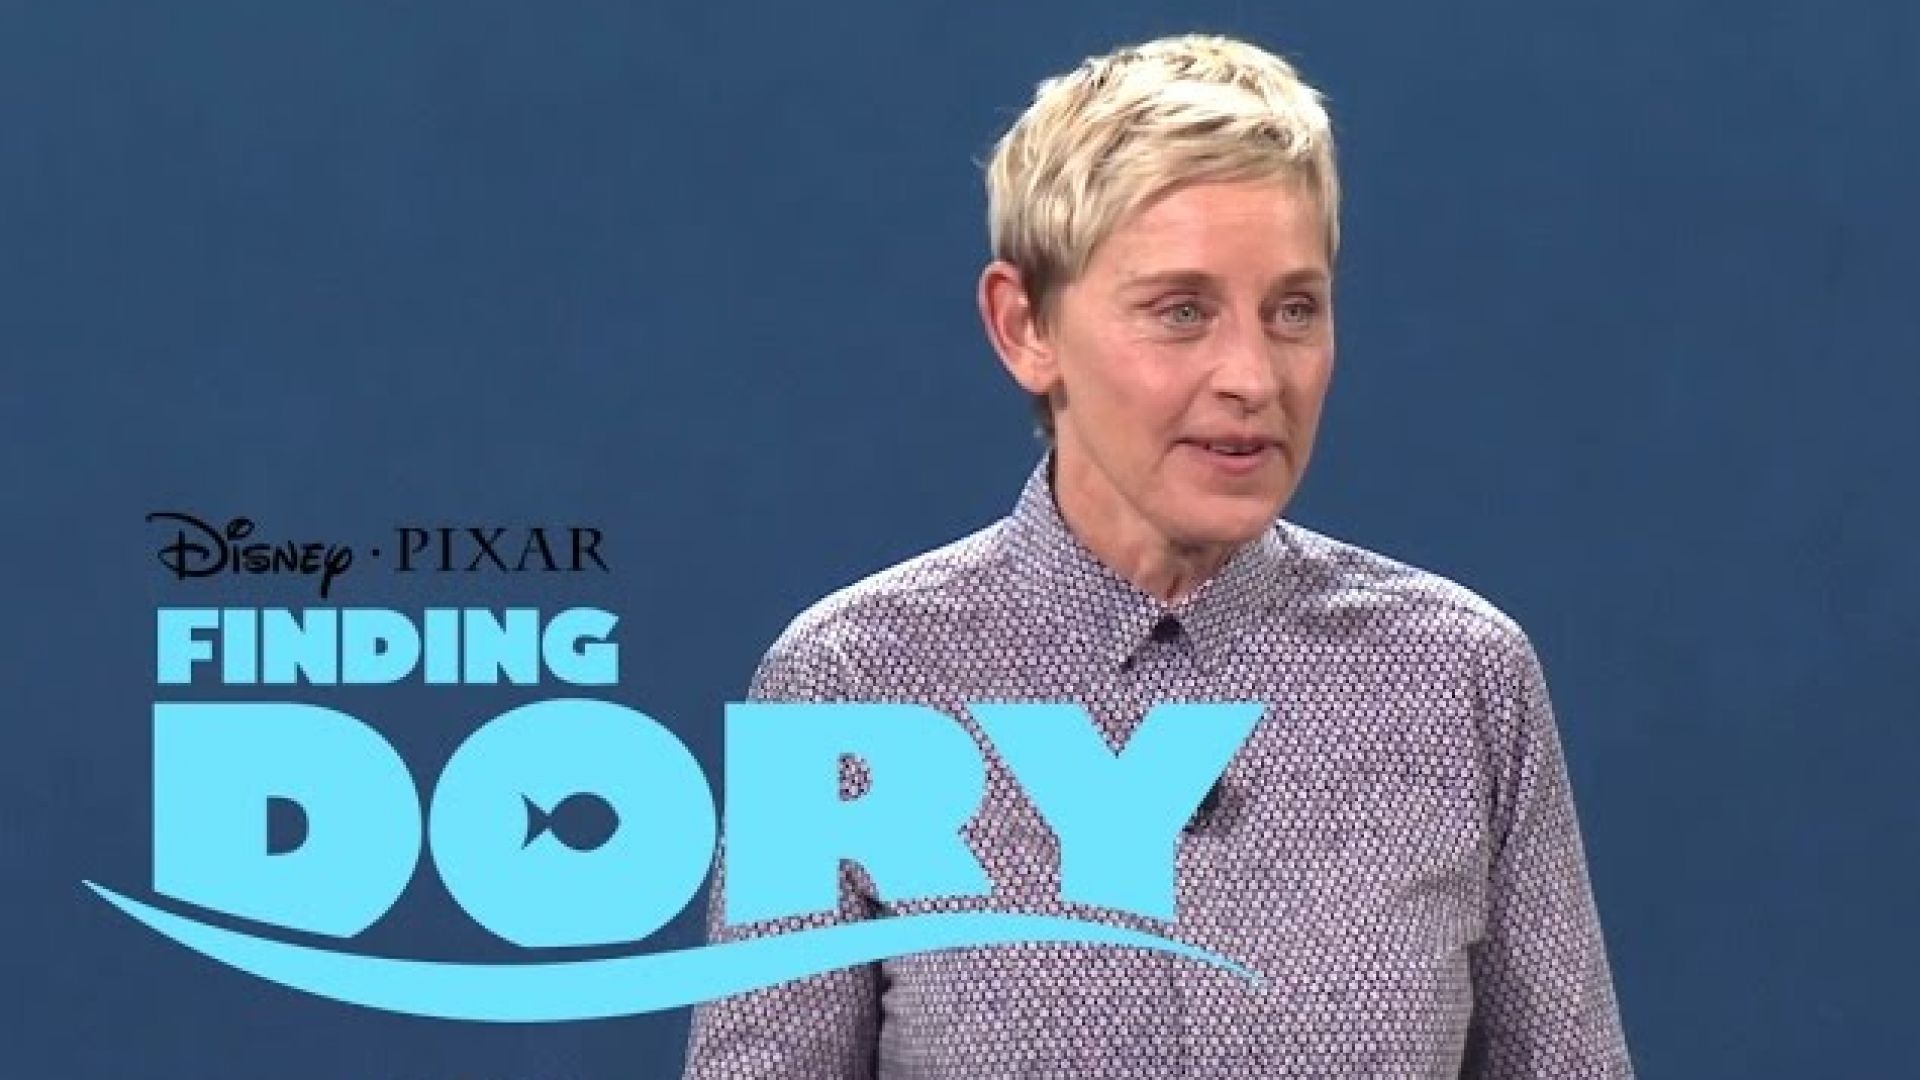 Pixar&#039;s &#039;Finding Dory&#039; D23 Expo Panel Presentation with Elle